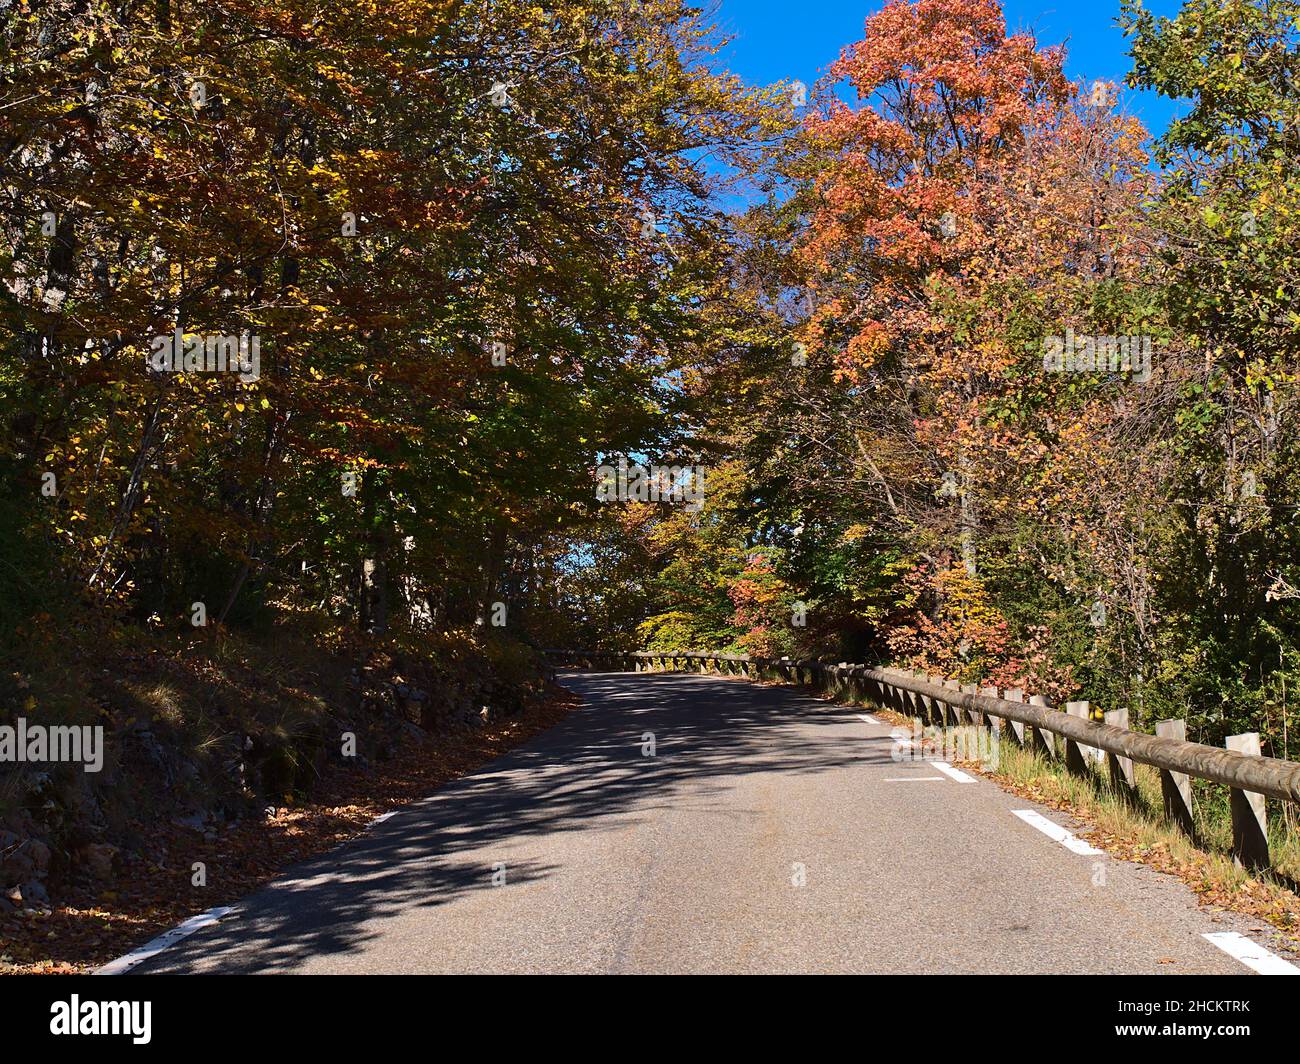 Beautiful view of country road D71 at the edge of famous Verdon Gorge in Provence region in the south of France in autumn season with colorful trees. Stock Photo